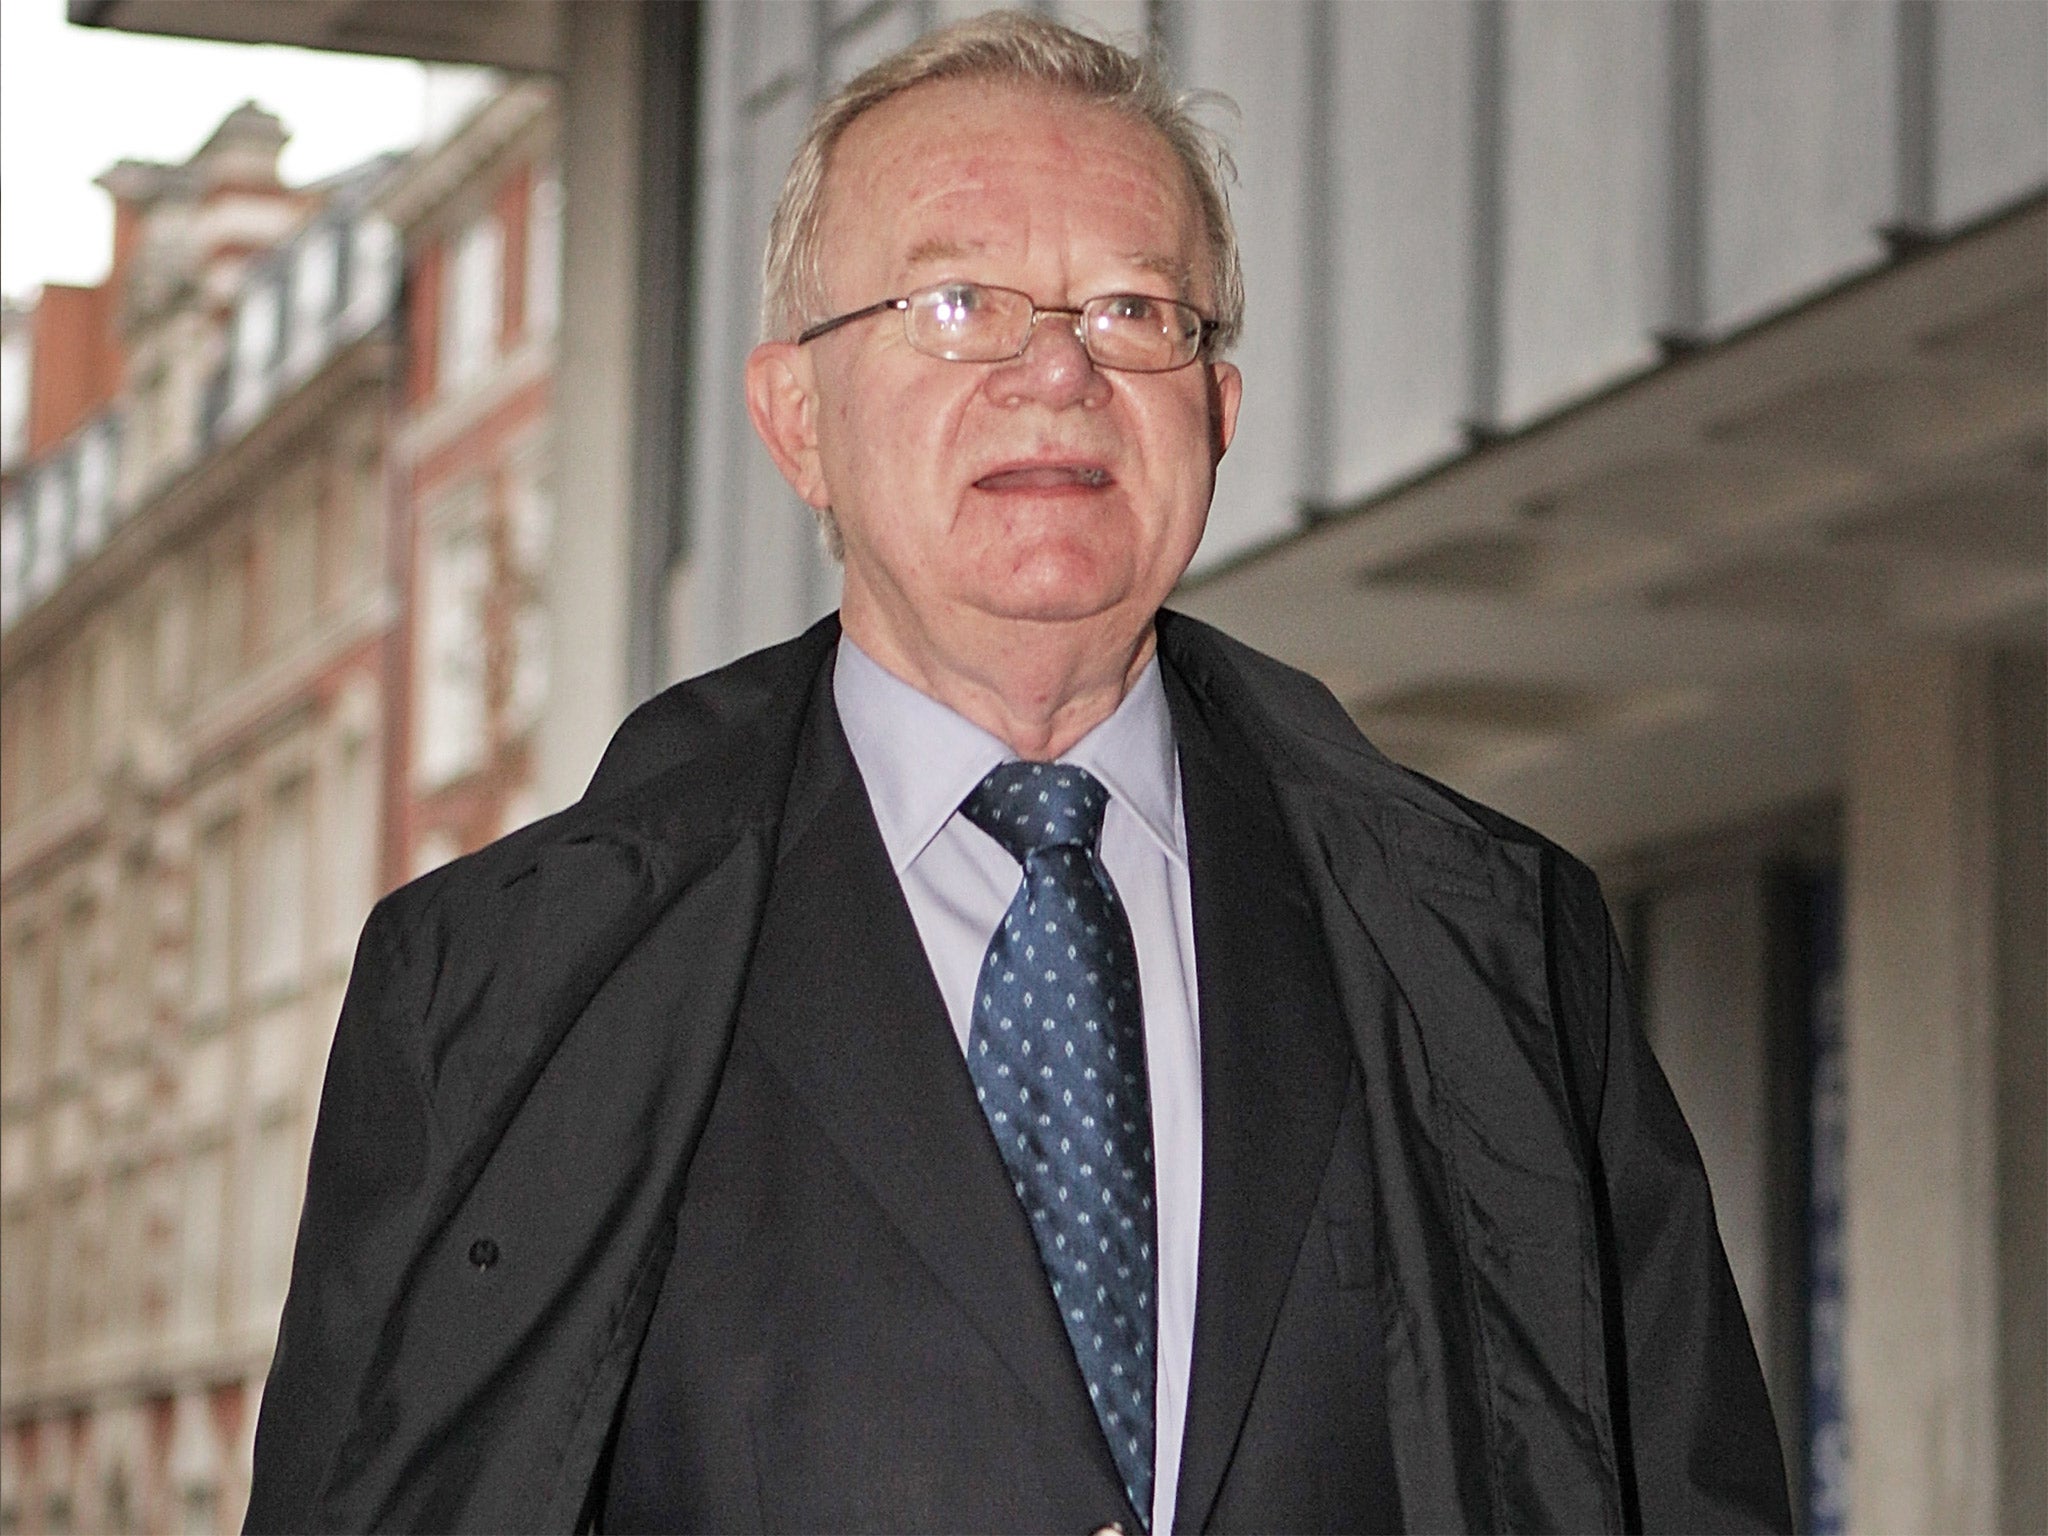 Sir John Chilcot launched the Iraq Inquiry in July 2009